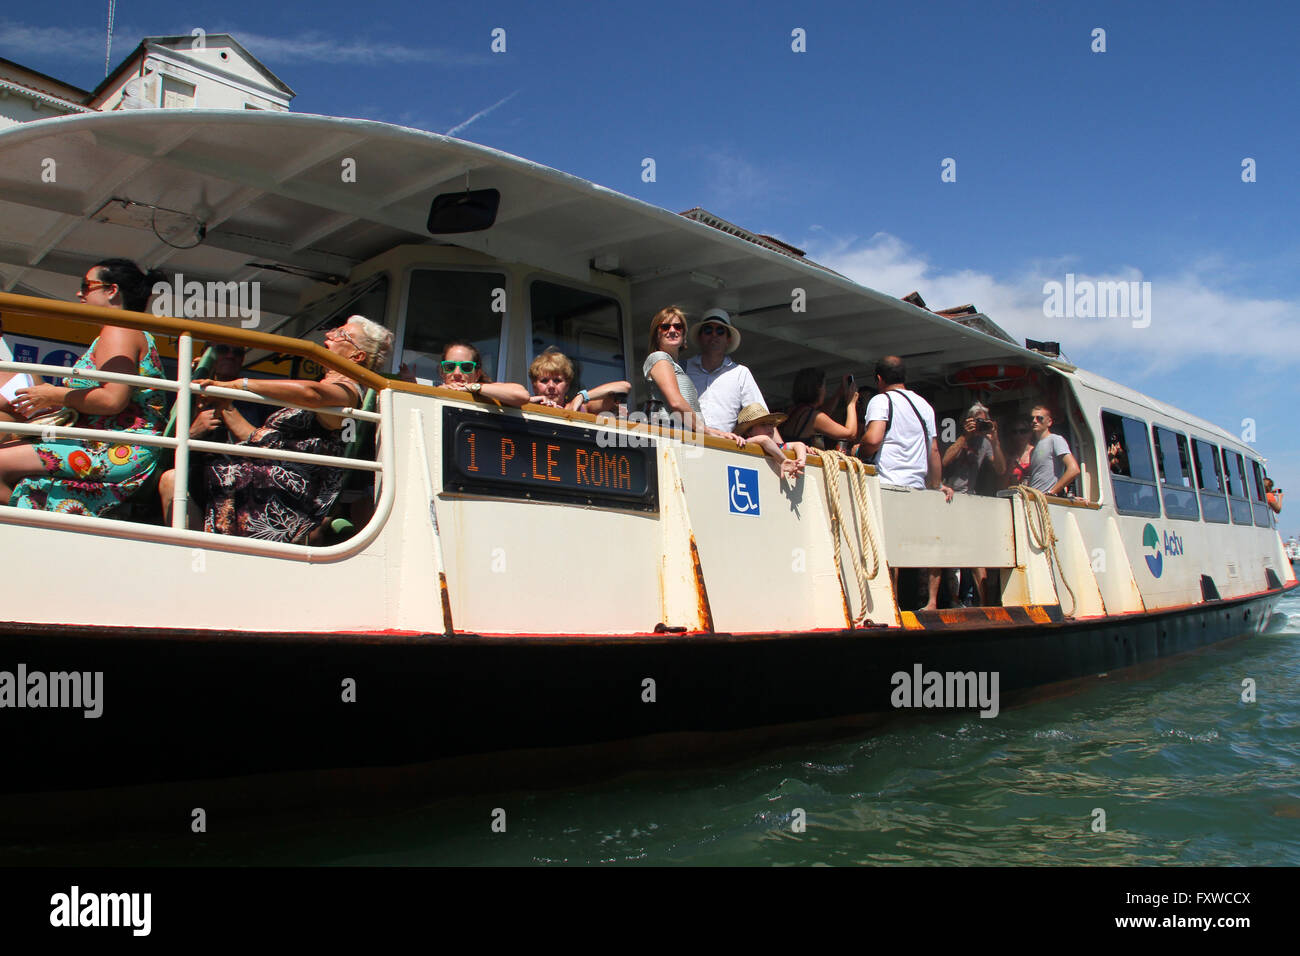 PASSENGER FERRY GRAND CANAL VENICE ITALY 02 August 2014 Stock Photo